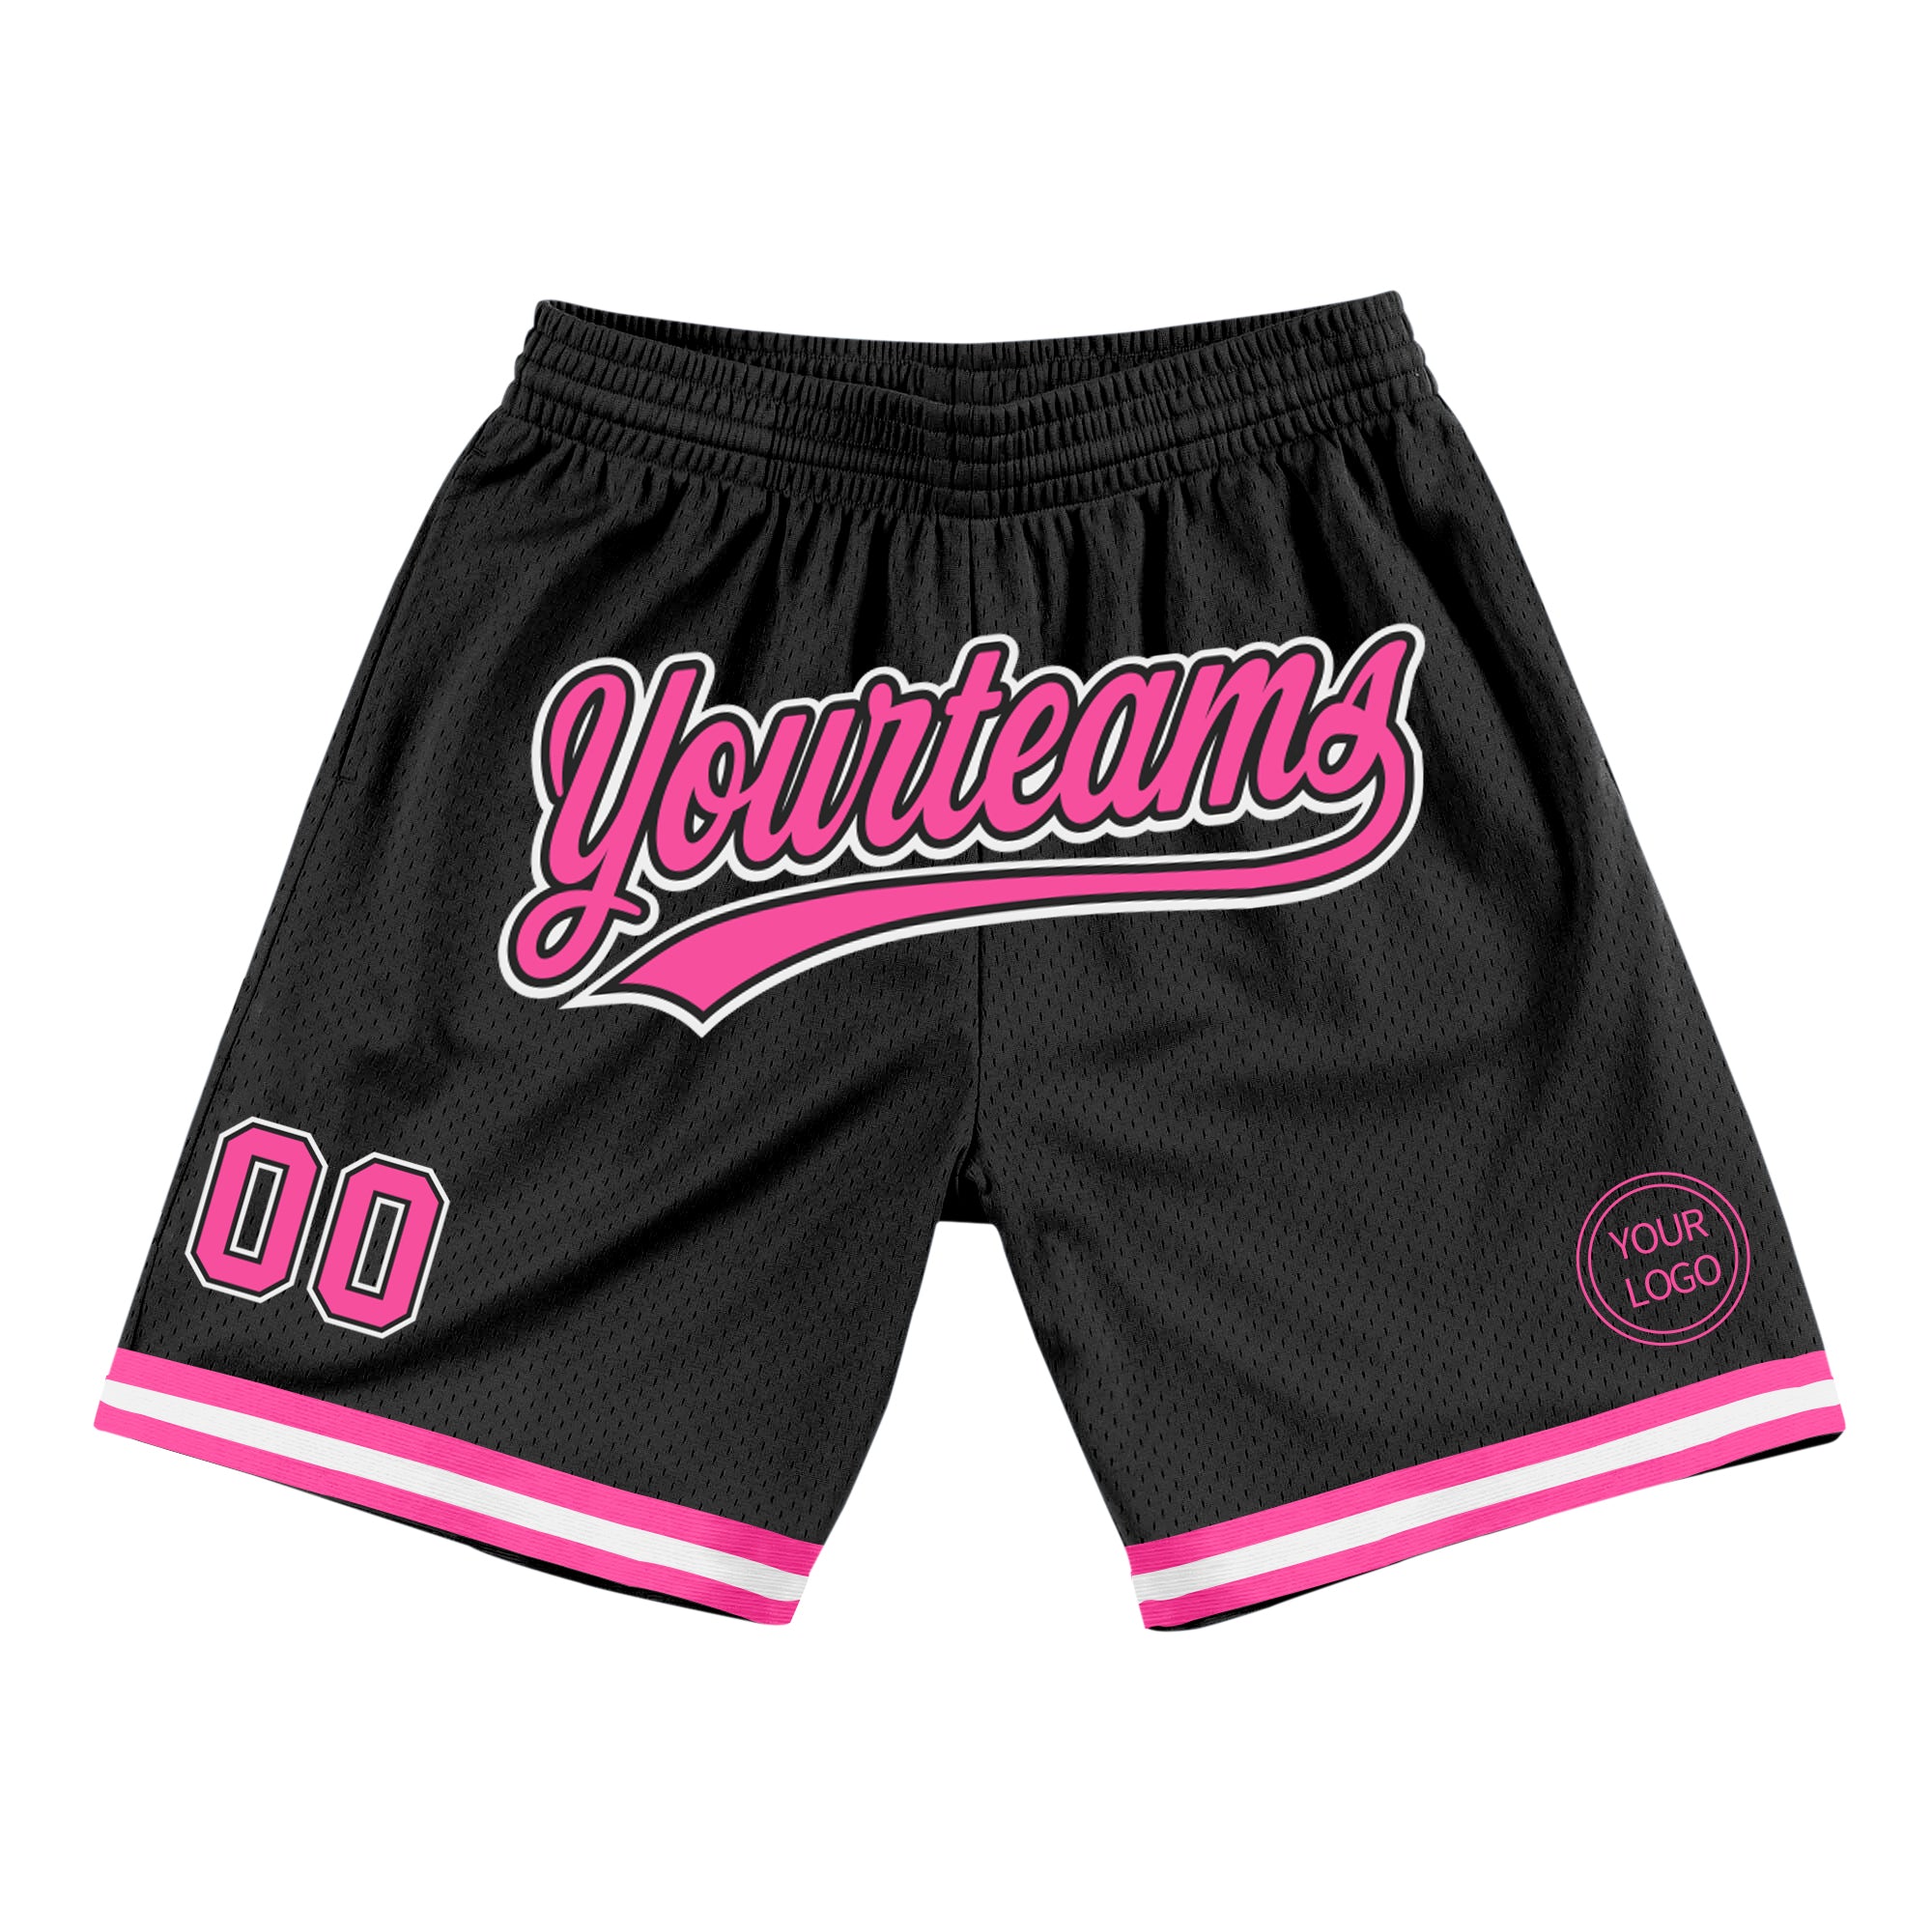 Men's Pink Panther Basketball Jersey Suit Mesh Breathable Shorts Pink M 